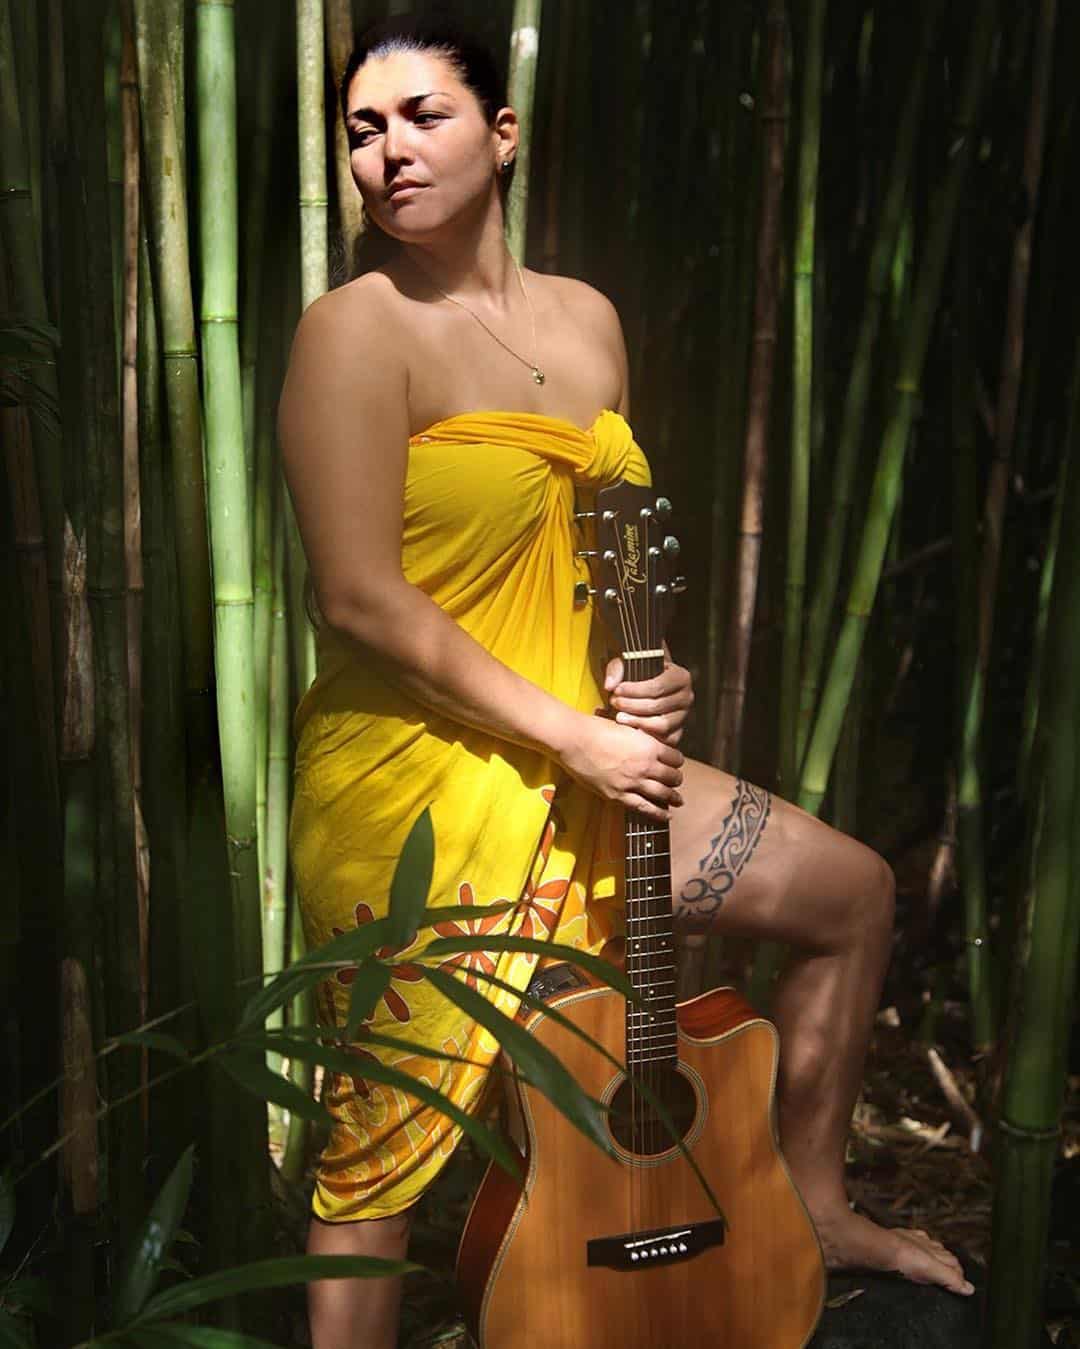 Join us in the courtyard at 6:00pm! Up and coming local artist, Aja Gample, is making a surprise guest performance. Admission is free! #WeAreWard #wardvillage #kakaako #mele #hawaiianmusic #hula #supportlocal